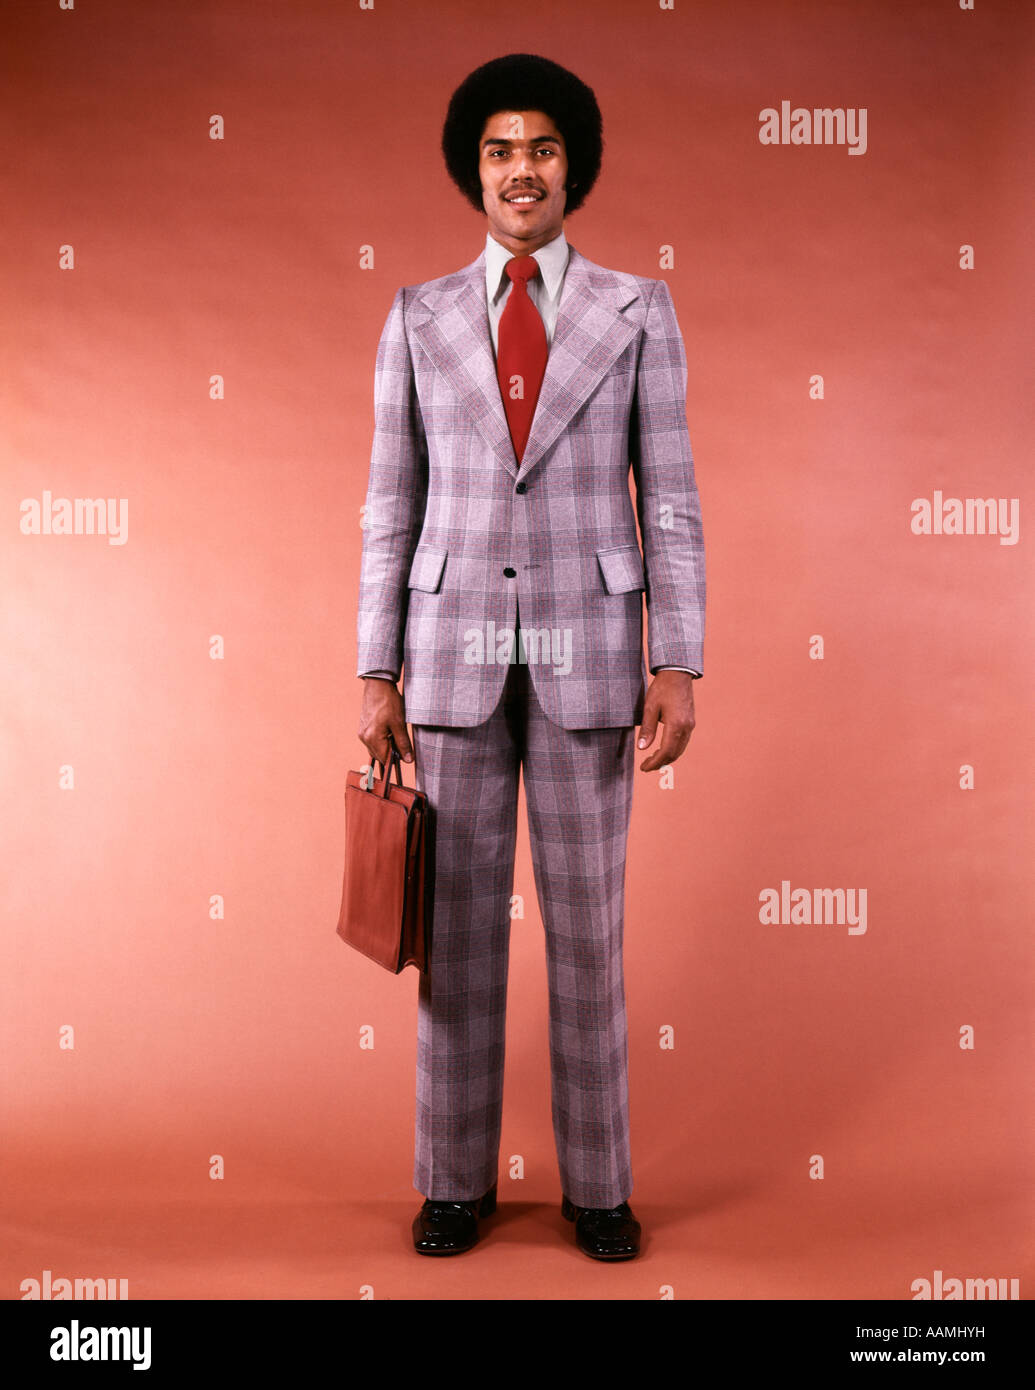 1970s ARICAN-AMERICAN ETHNIC BUSINESSMAN PORTRAIT FULL FIGURE HOLD BRIEFCASE IN GLEN PLAID SUIT MAN FASHION AFRO HAIR Stock Photo